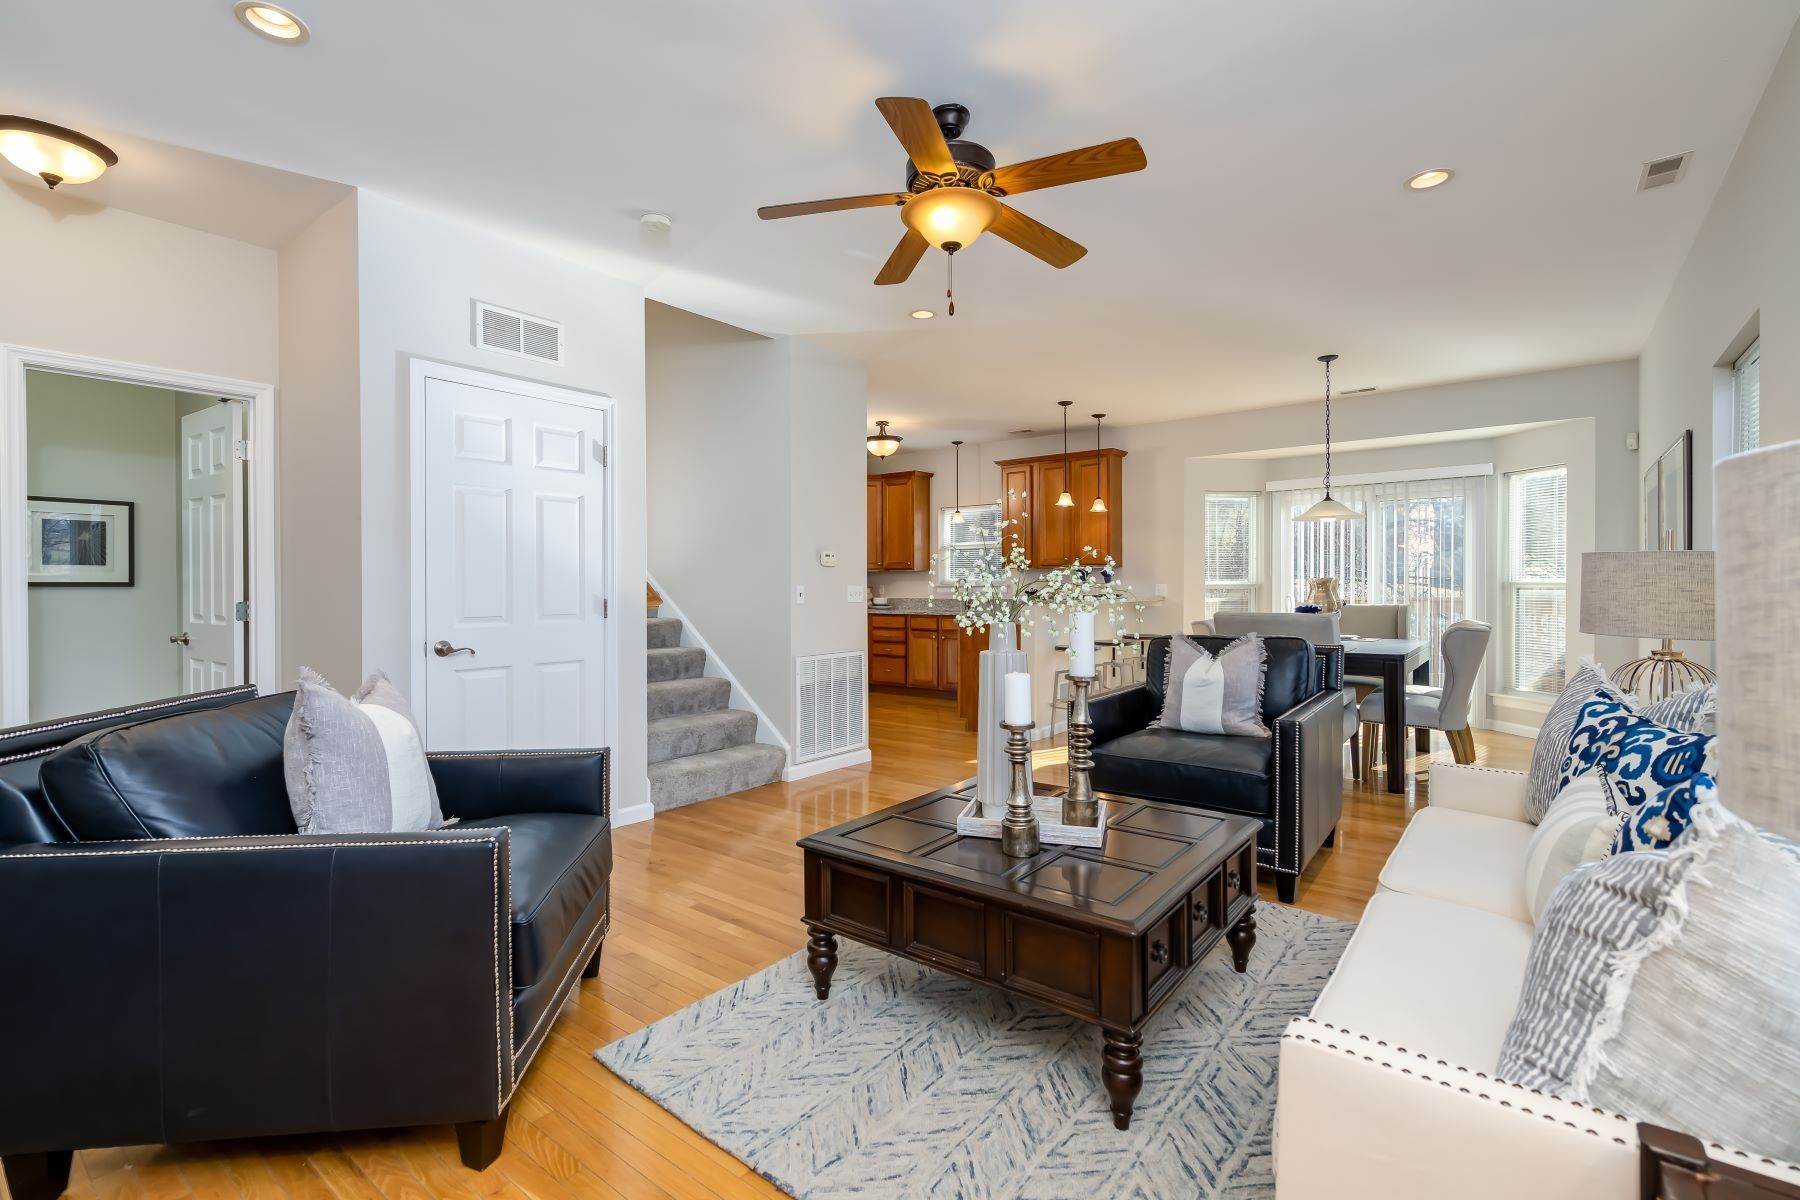 3. Condominiums for Sale at Carefree Living in Fabulous Townhome 8018 #B Presidio Court University City, Missouri 63130 United States